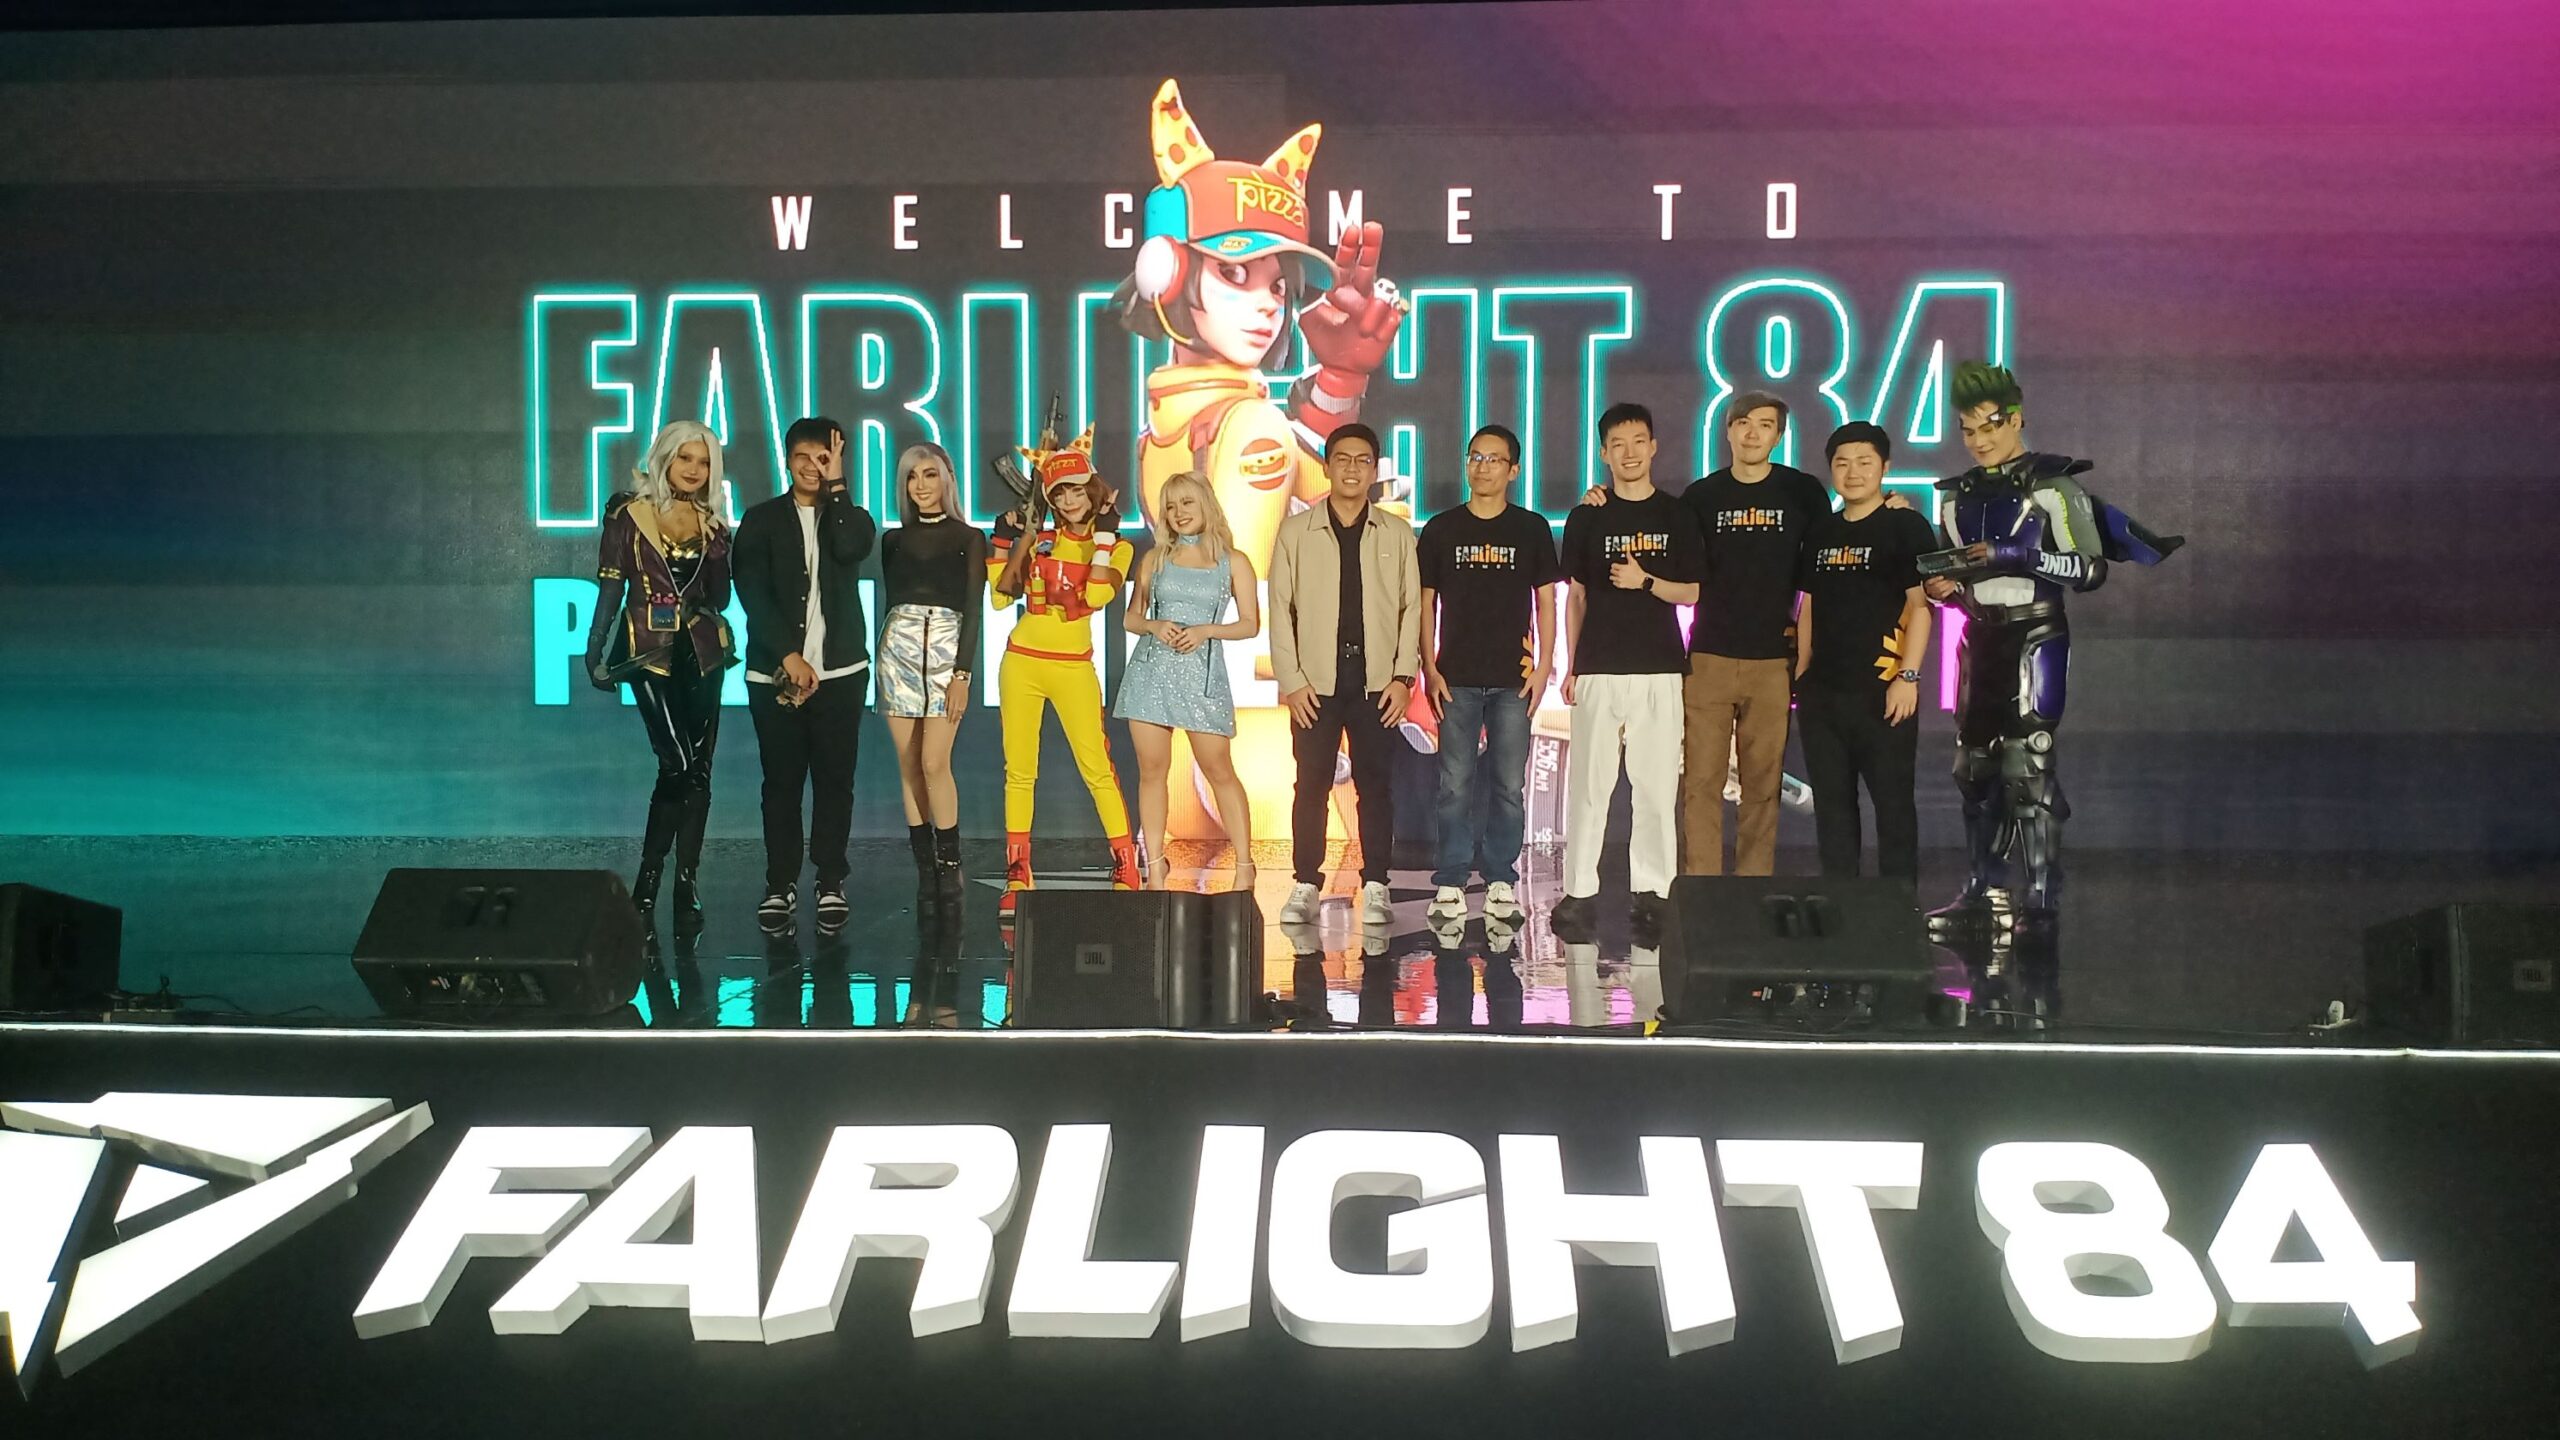 FARLIGHT 84 launch in the Philippines